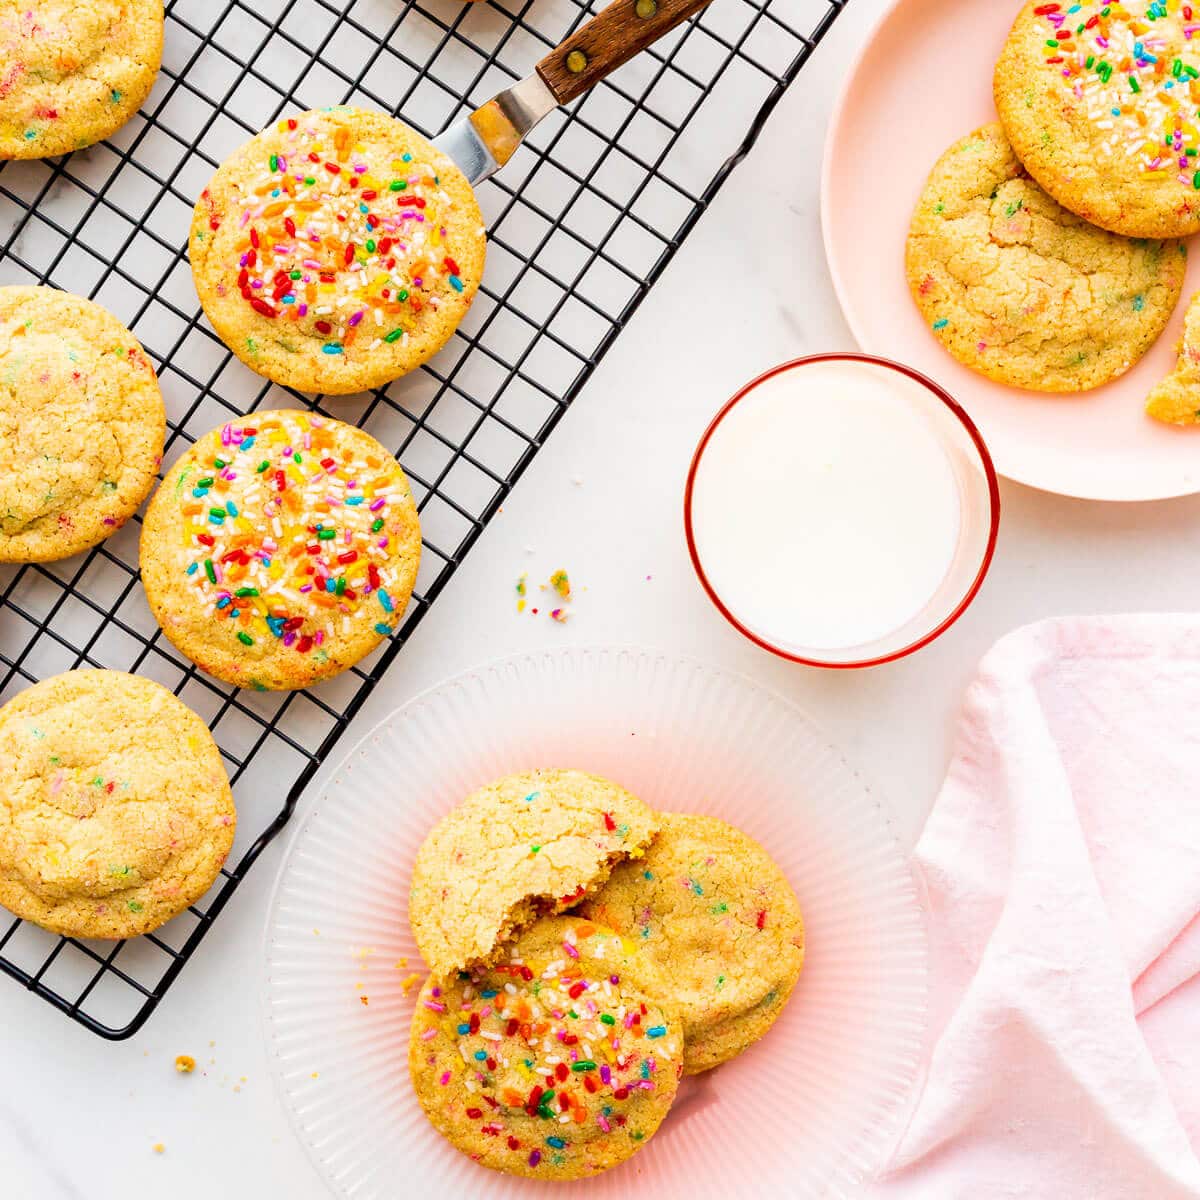 Sprinkle sugar cookies on a cooling rack and on pink plates, served with glasses of milk.